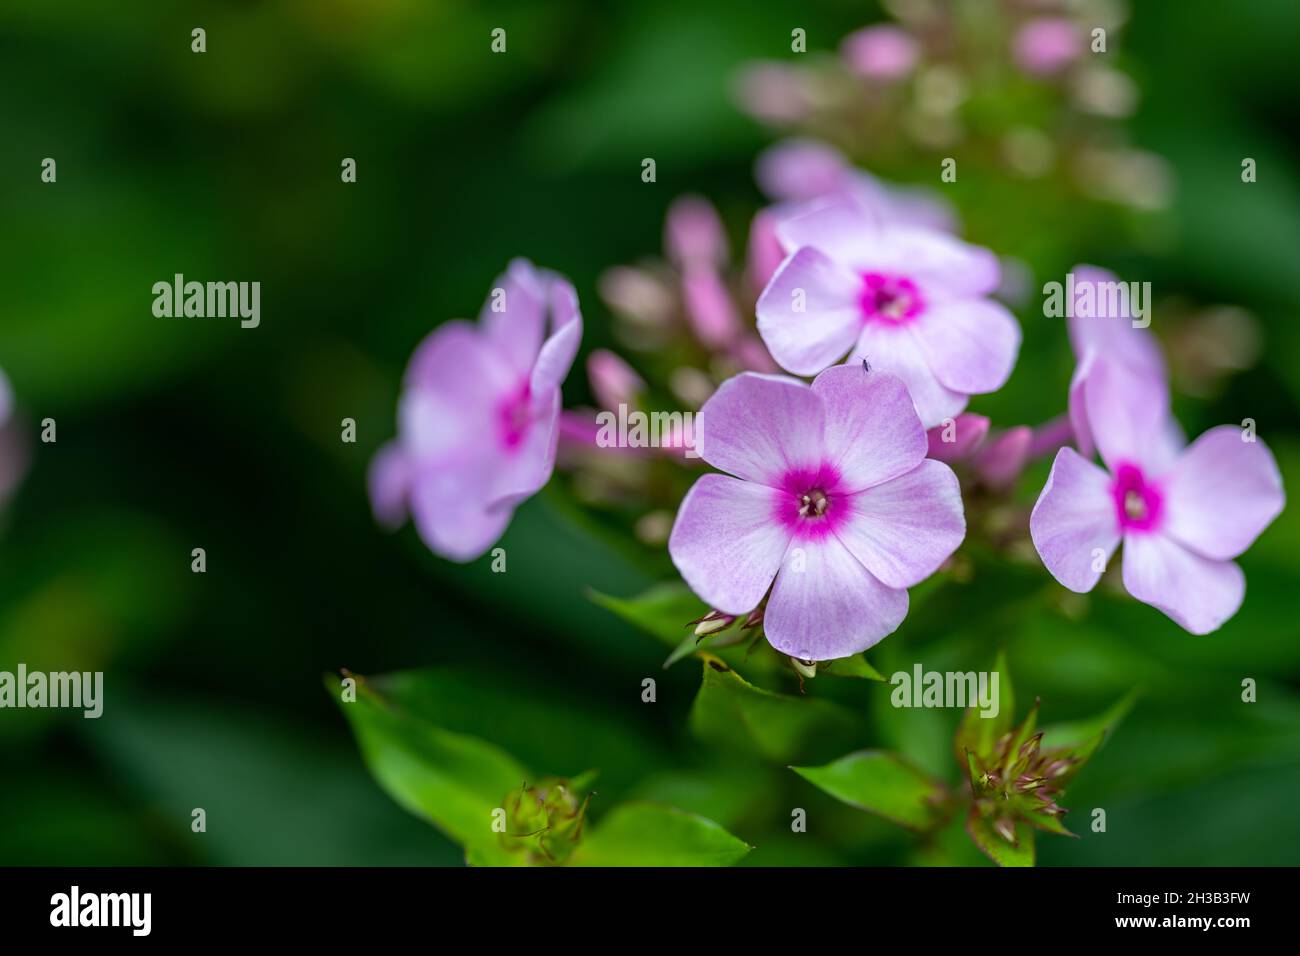 Closeup shot of a pink garden phlox flowering plant isolated against blurred background Stock Photo